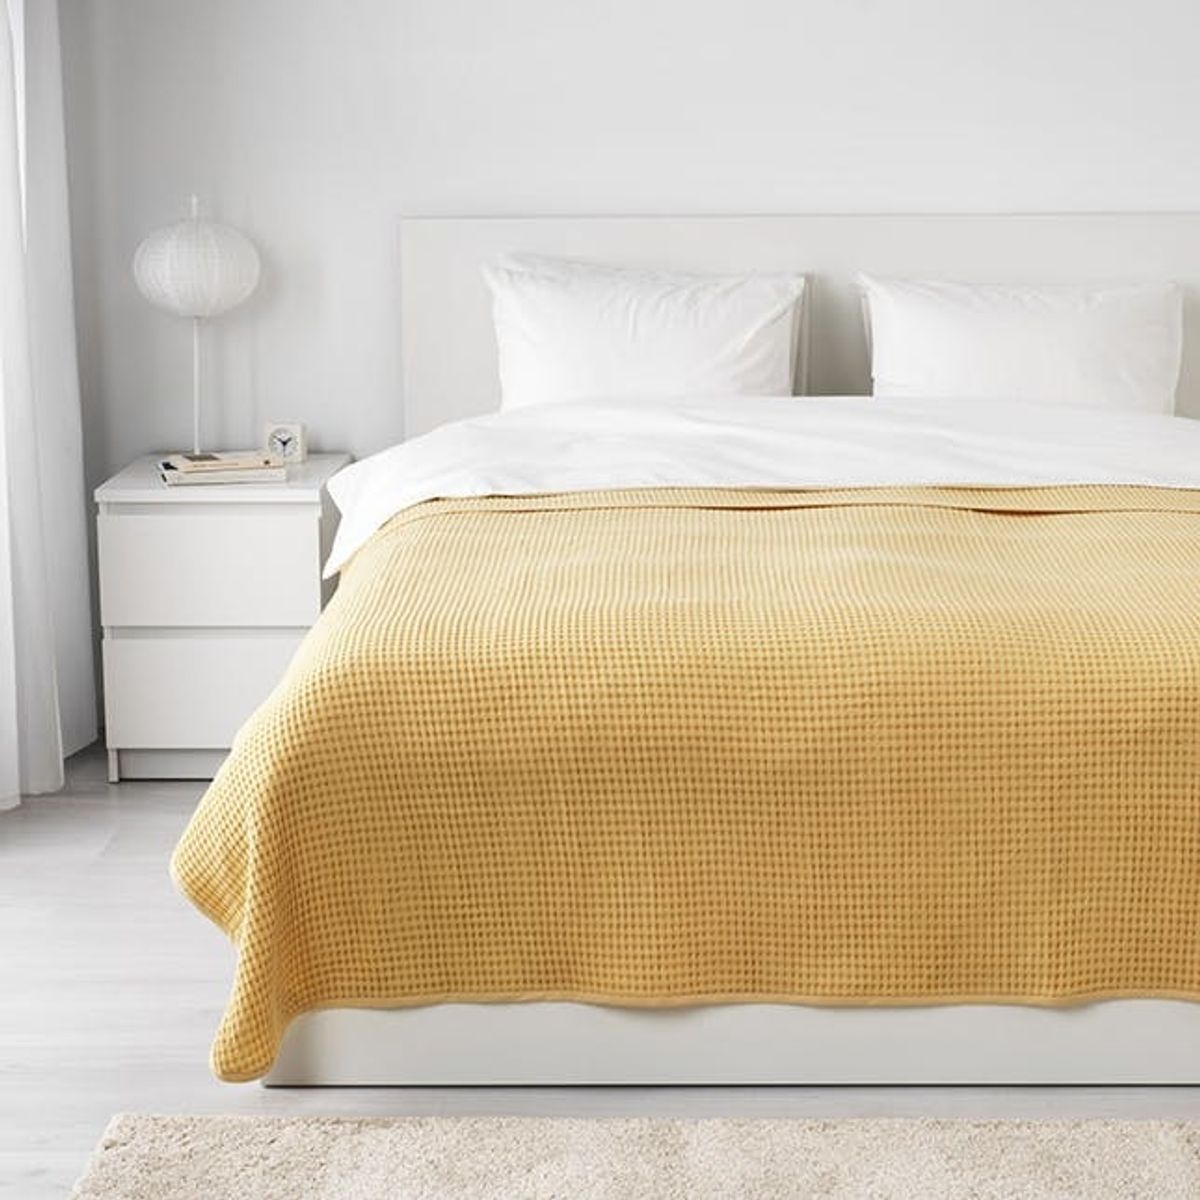 15 Summer Bedroom IKEA Essentials You Can Snag for Under $60